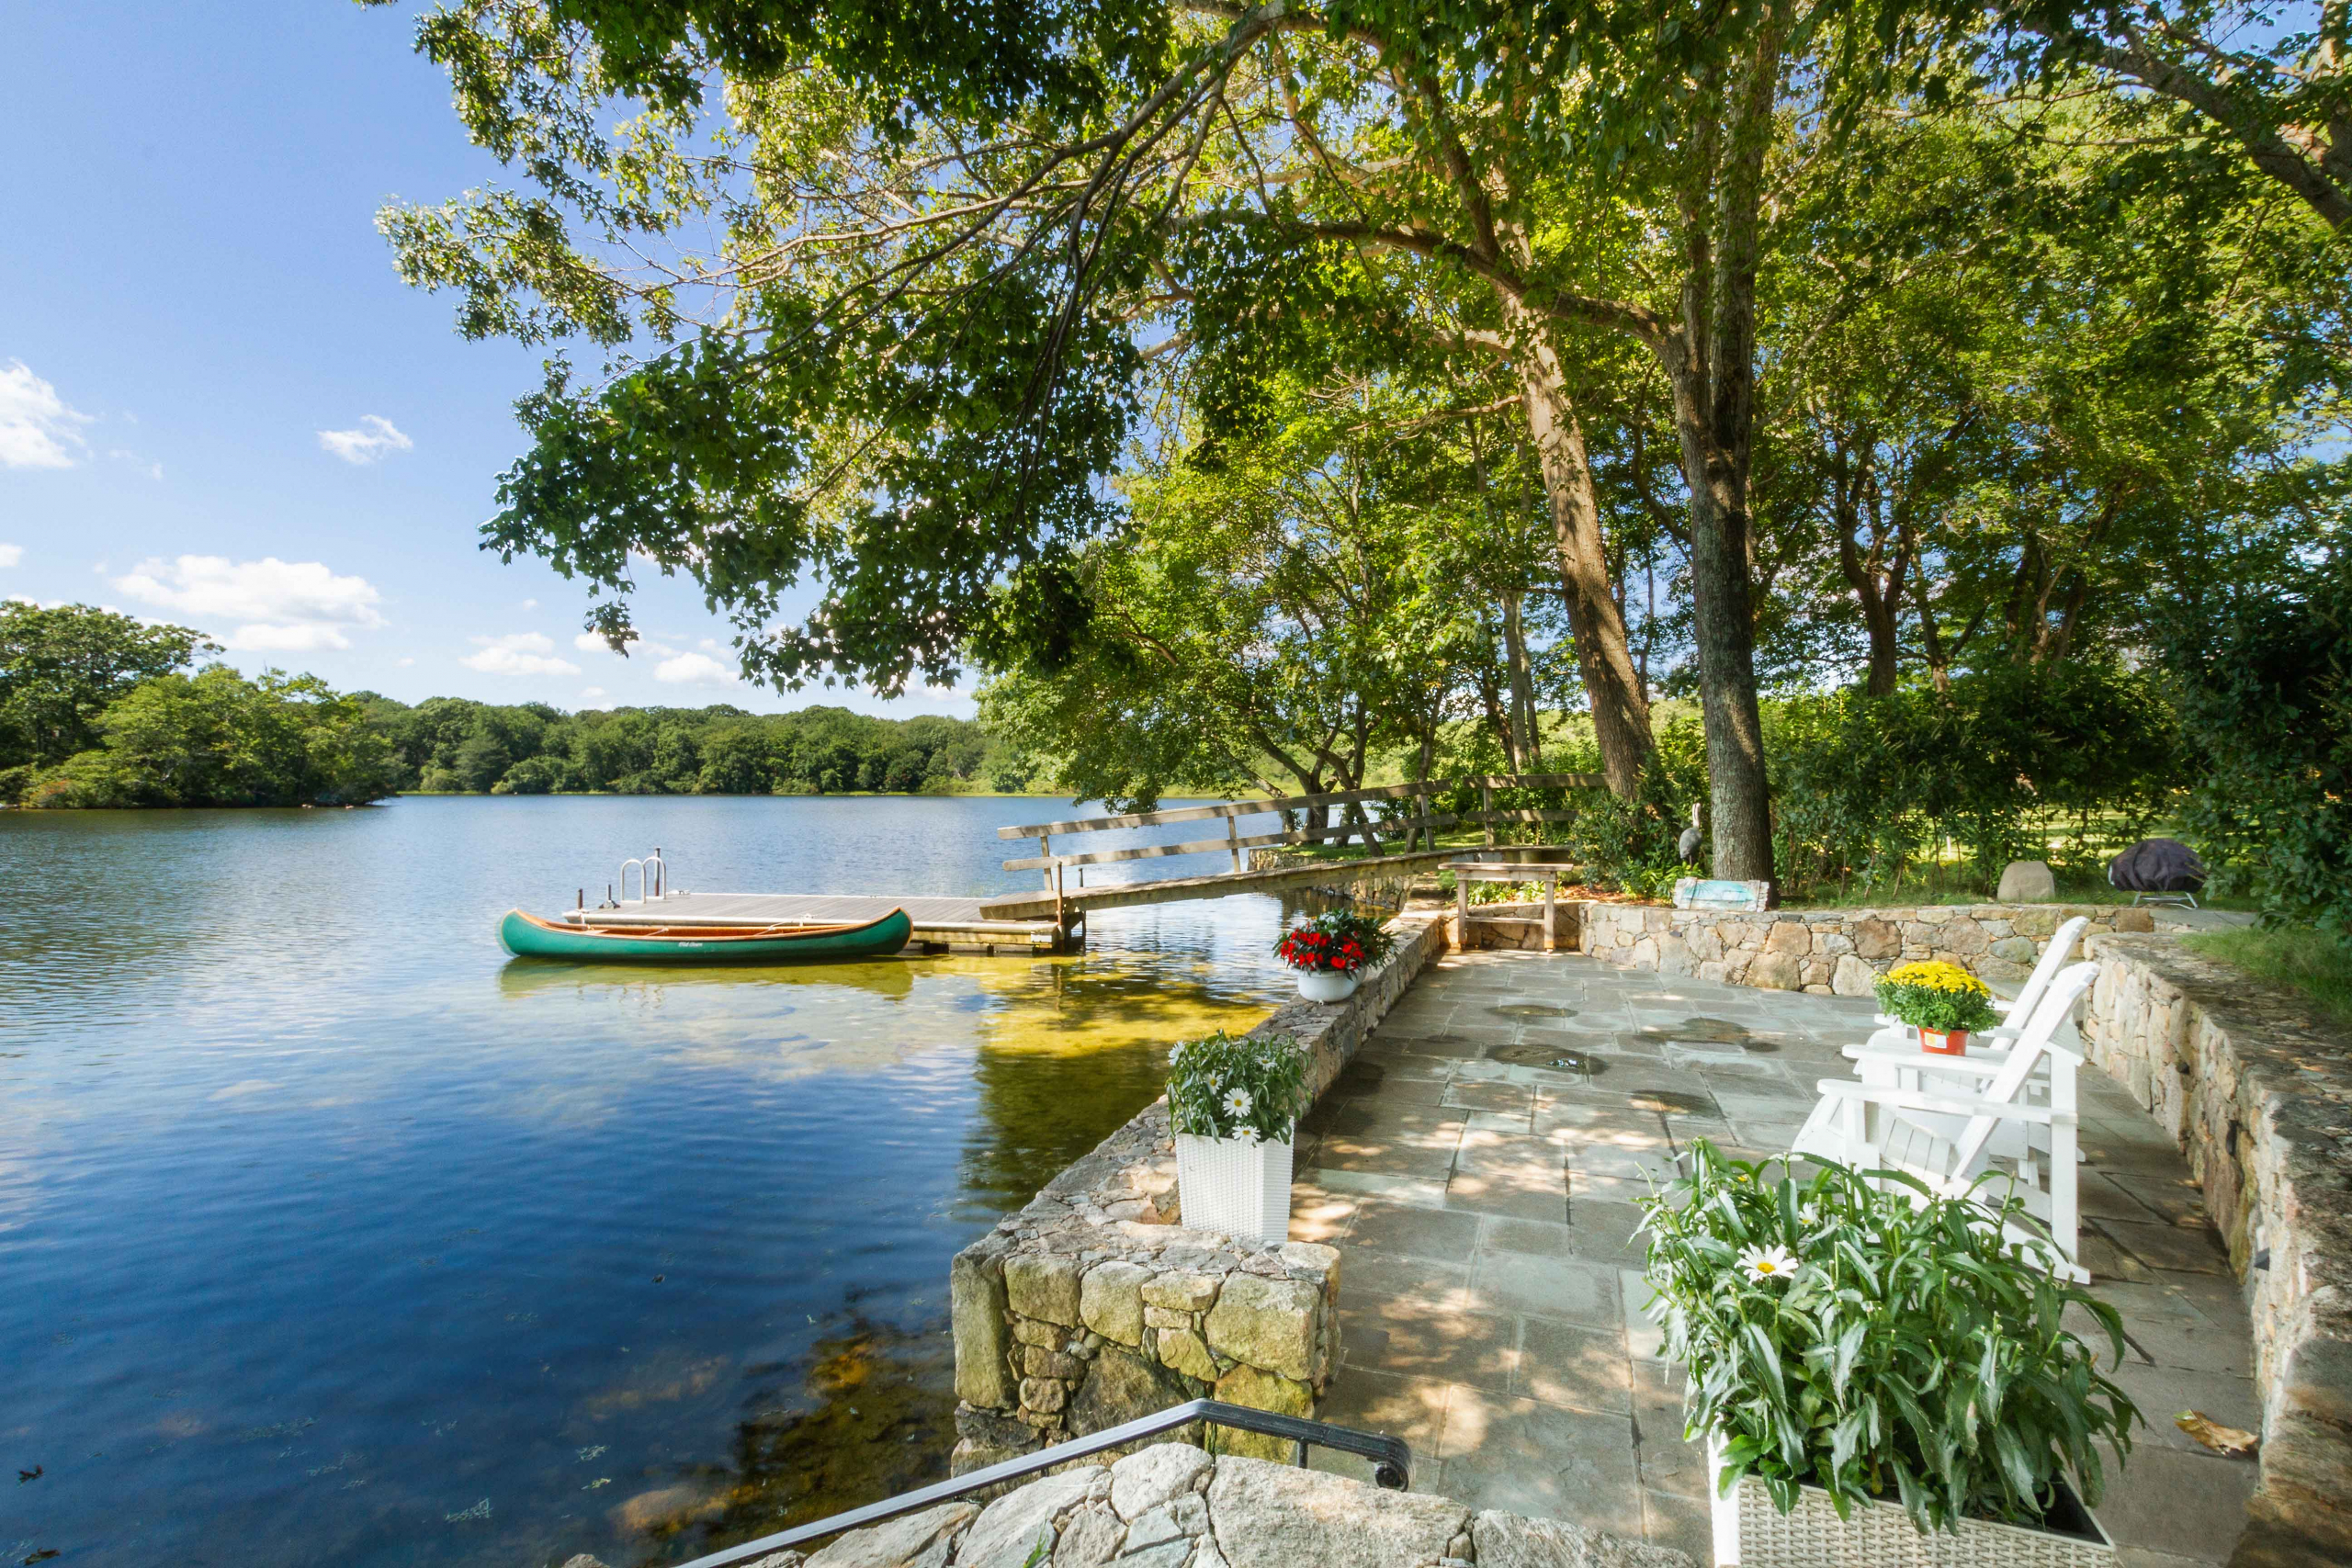 WATERFRONT SOUTH KINGSTOWN HOME SELLS FOR RECORD-BREAKING $1,287,500, MARKING THE HIGHEST SALE ON INDIAN LAKE EVER*